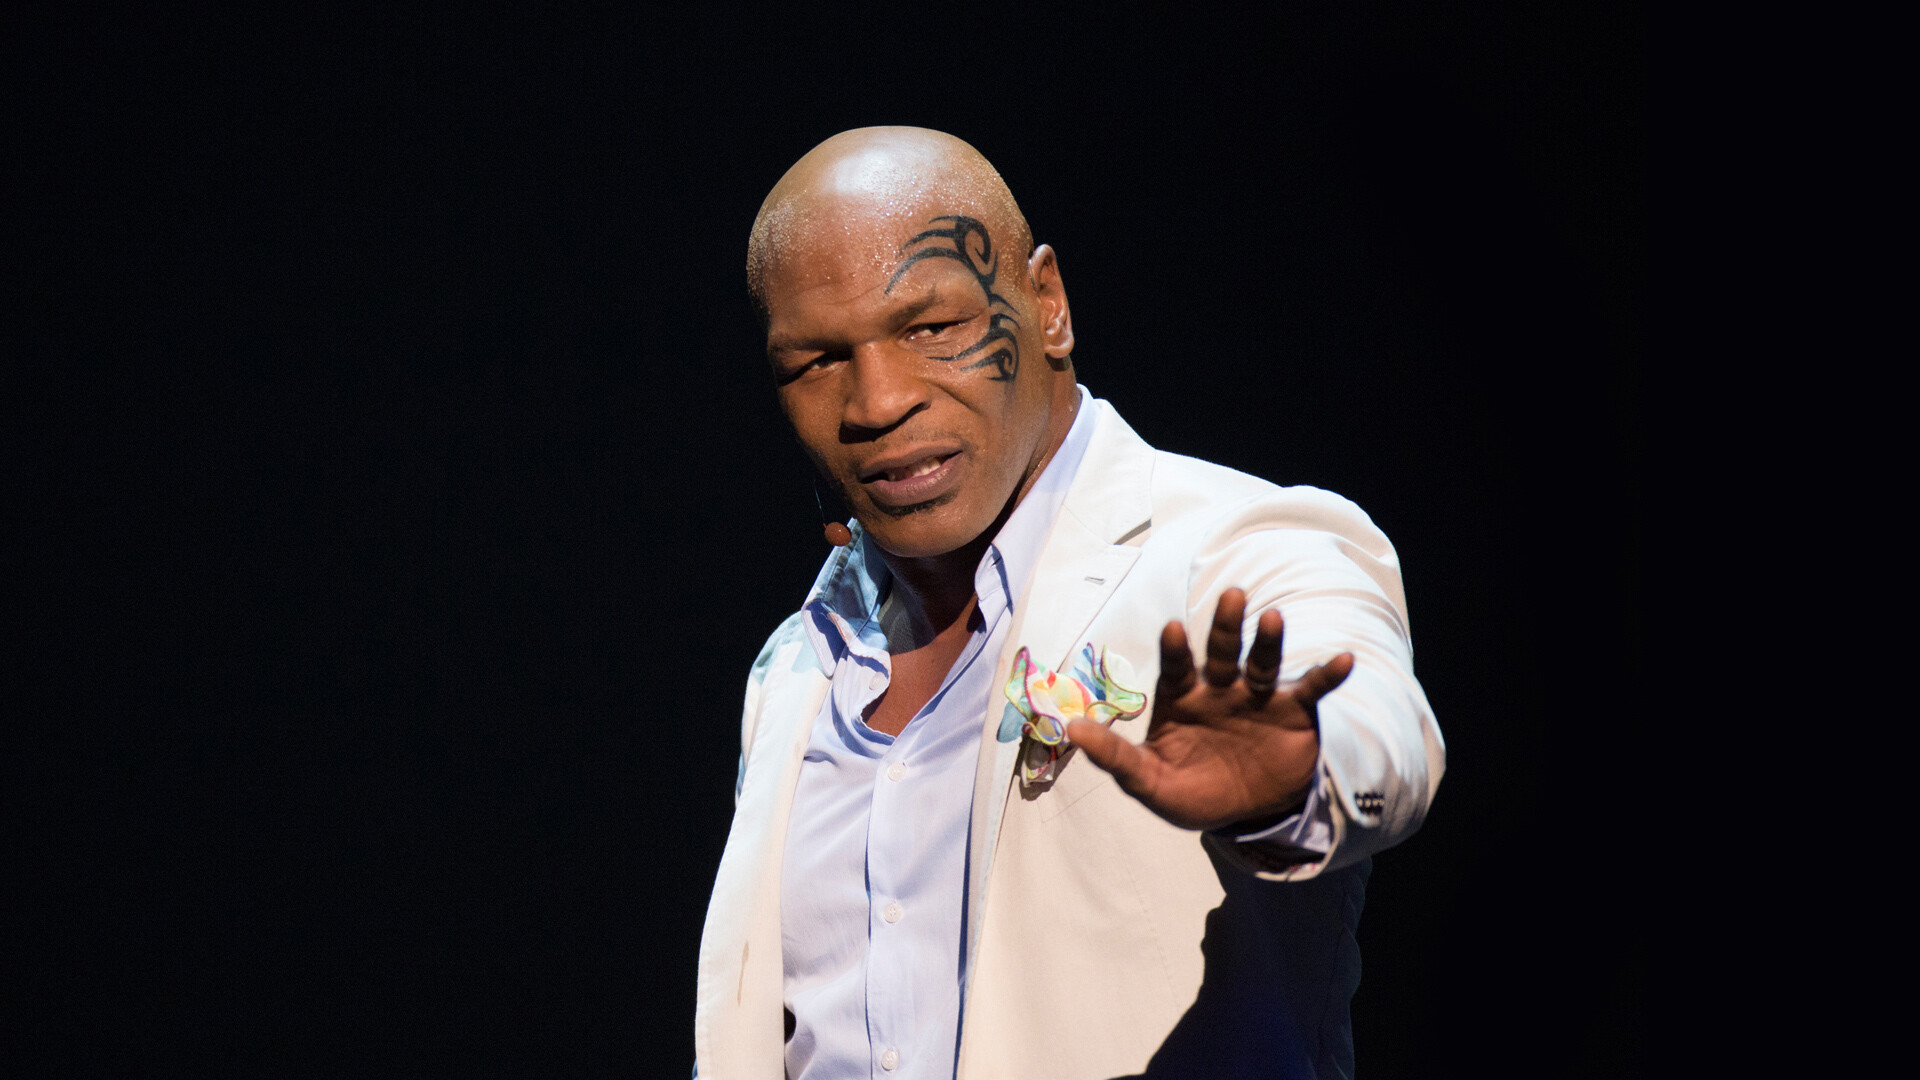 Mike Tyson, High-quality wallpapers, Impressive physique, Iconic figure, 1920x1080 Full HD Desktop